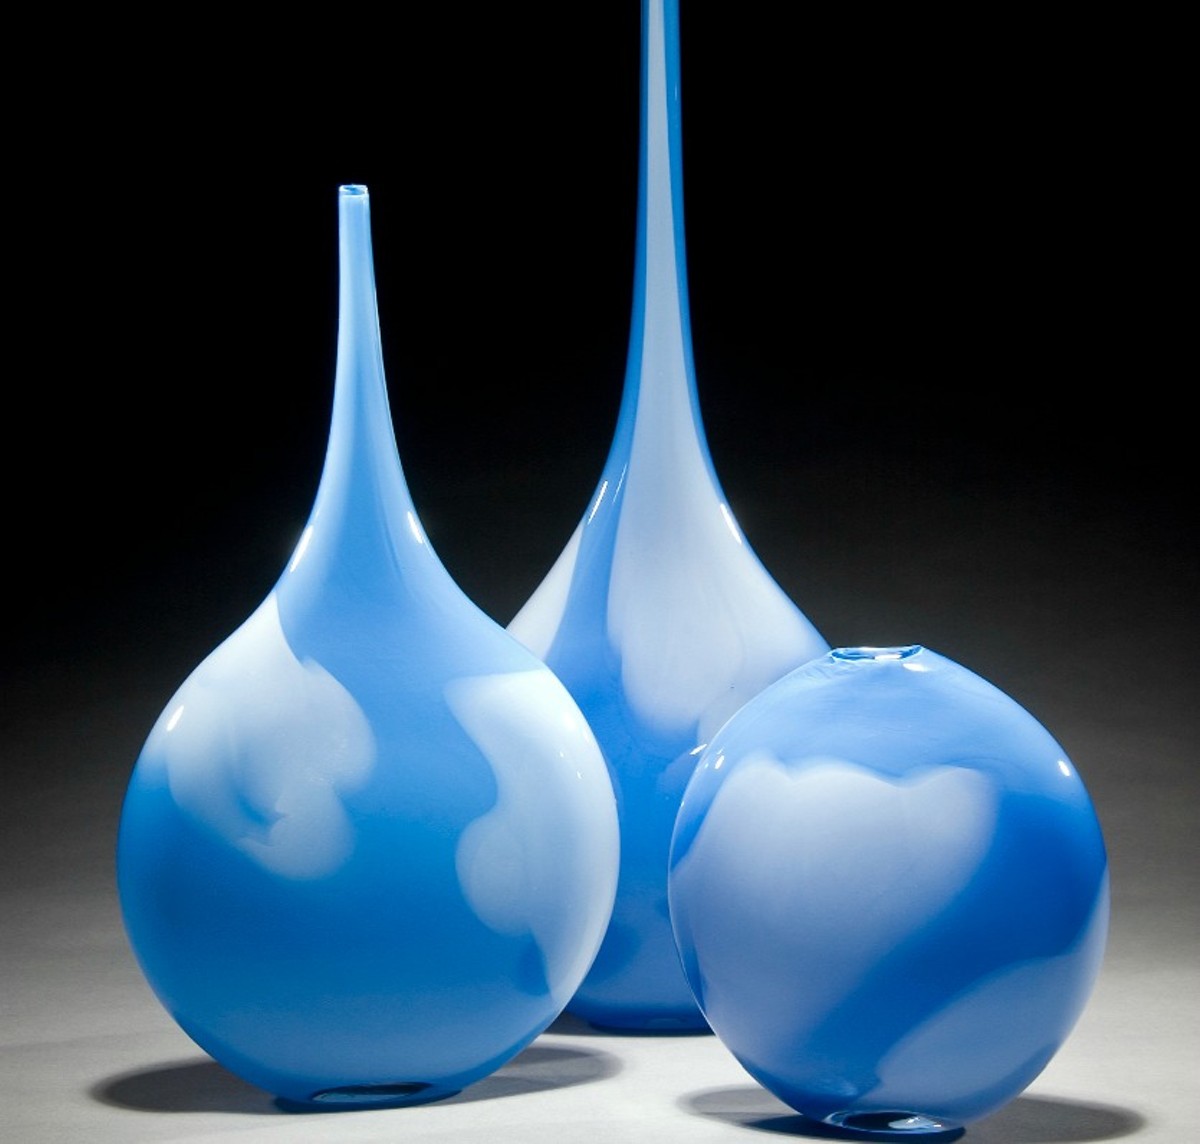 A Q&A with glass artist Casey Hyland